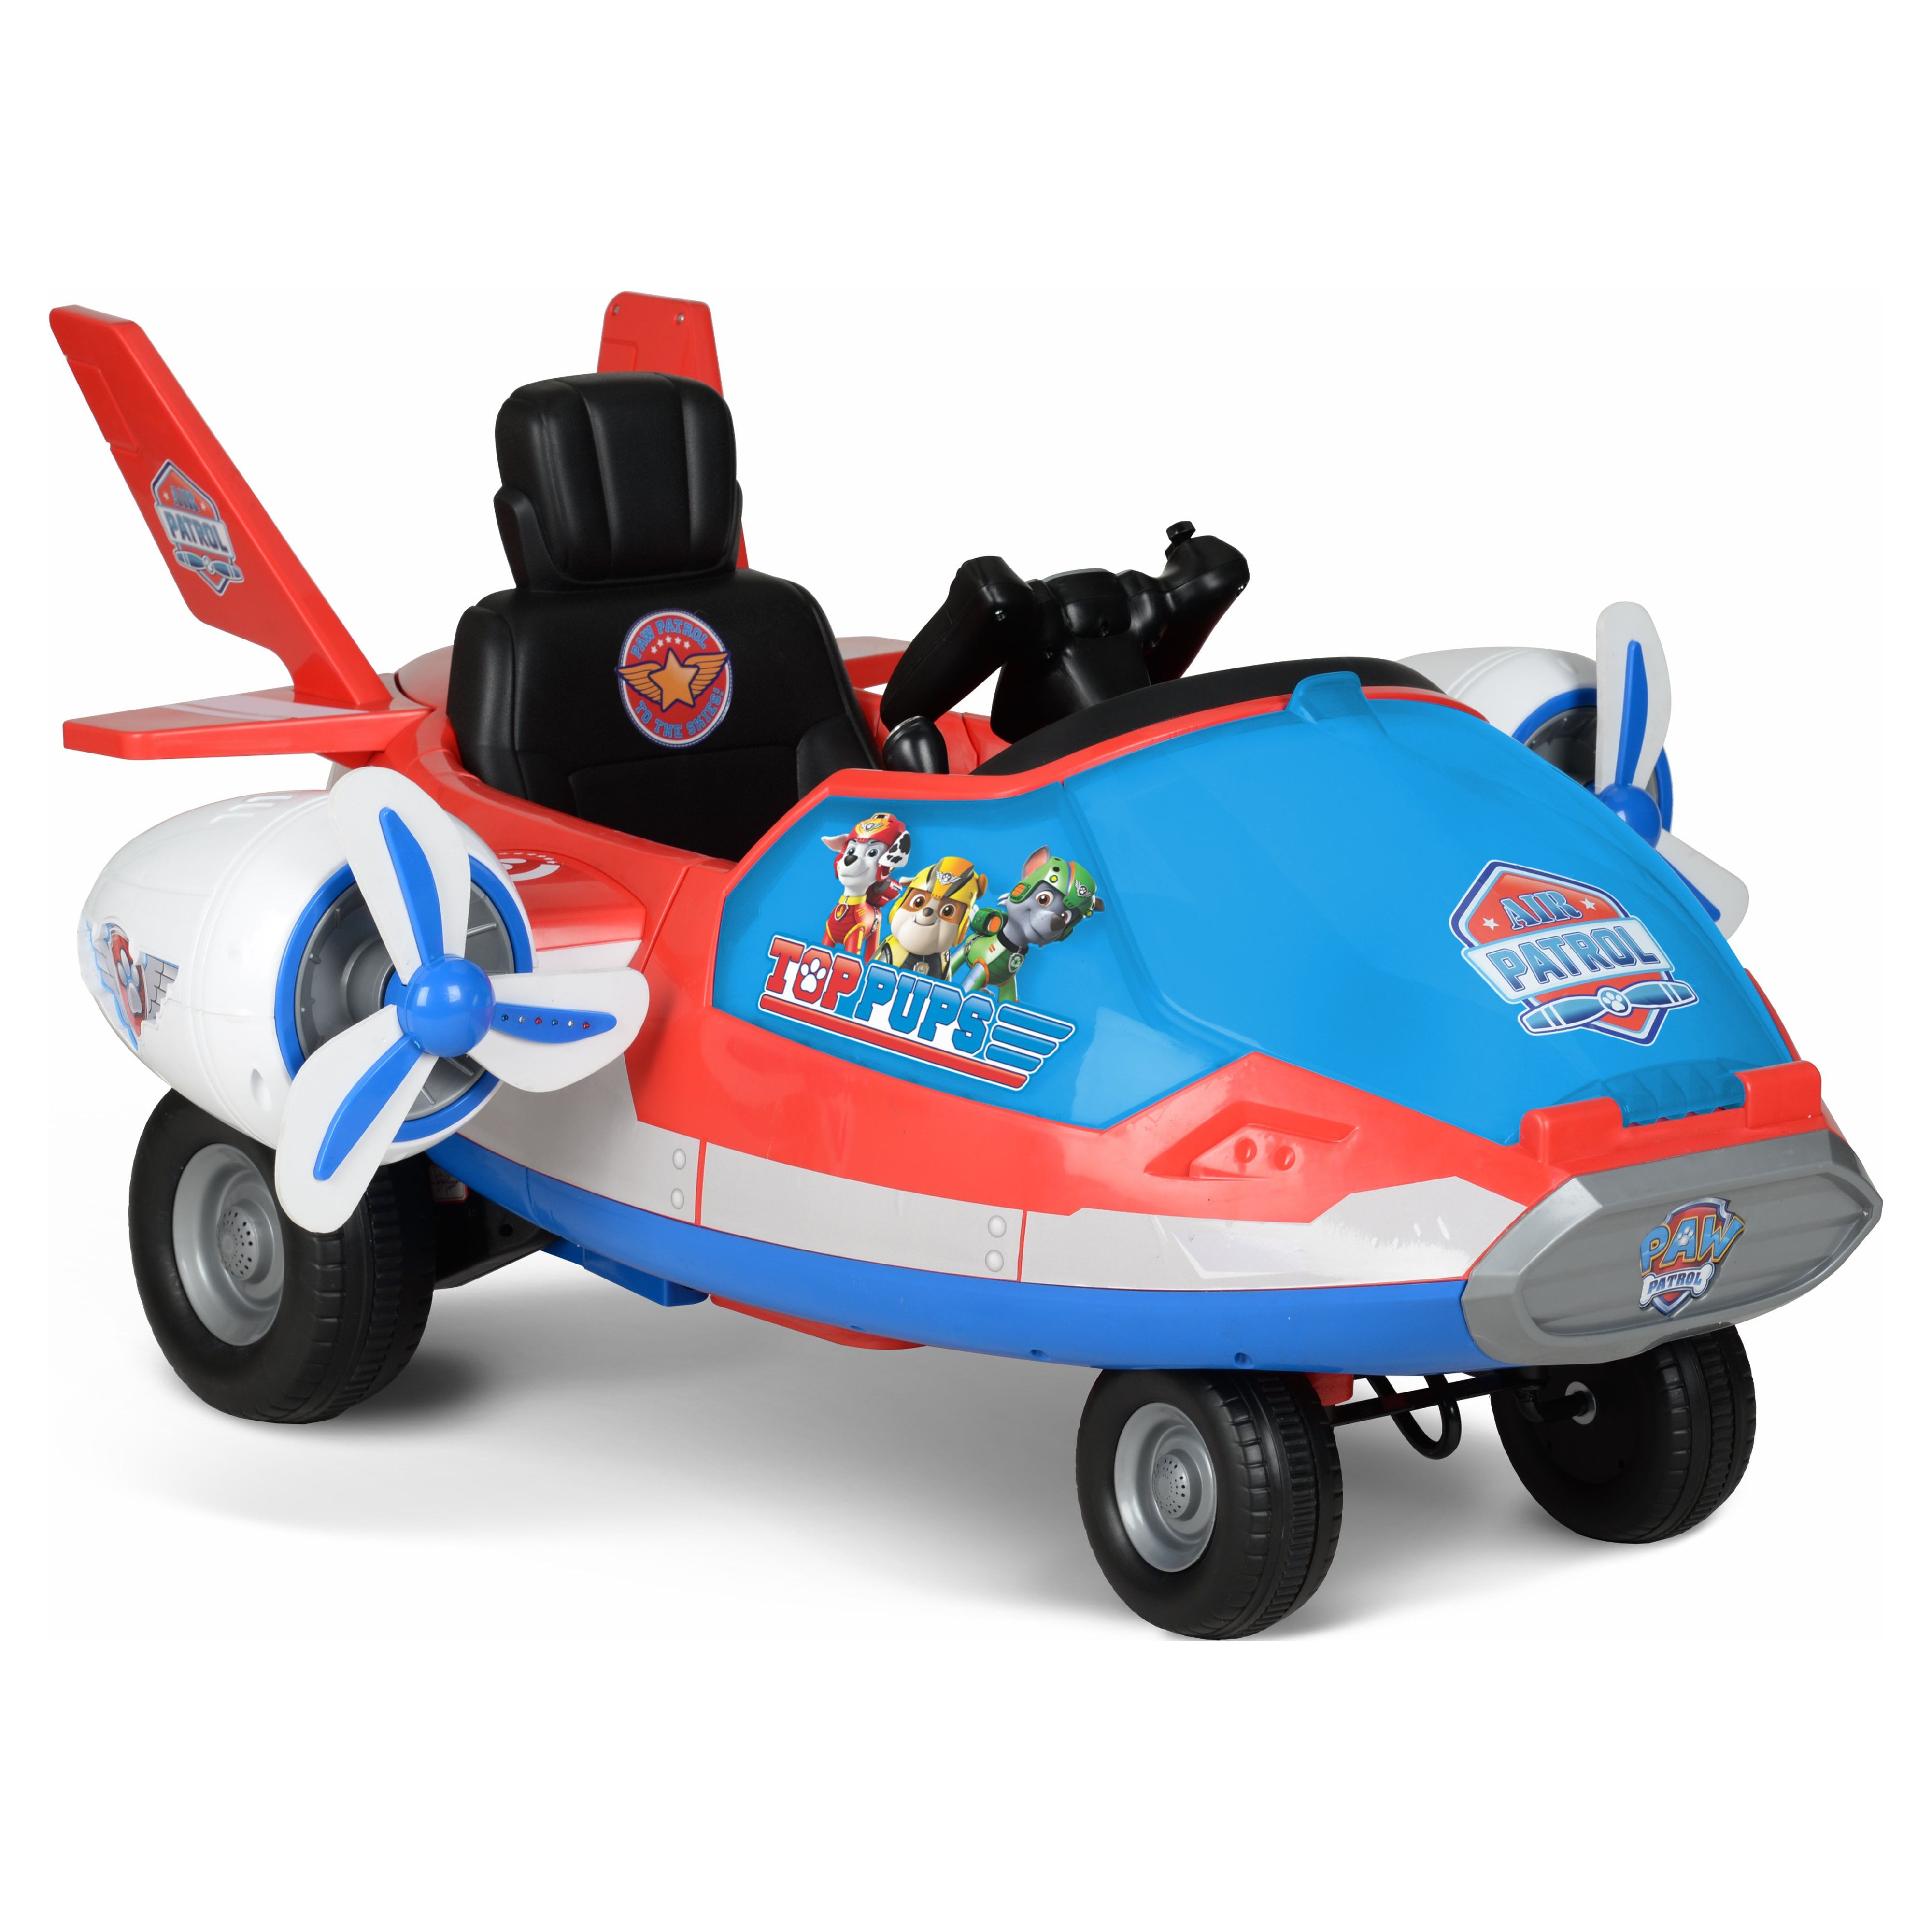 Nickelodeon 12 Volt Paw Patrol Airplane Battery Powered Ride On, for Ages 3 Years and up - image 5 of 11